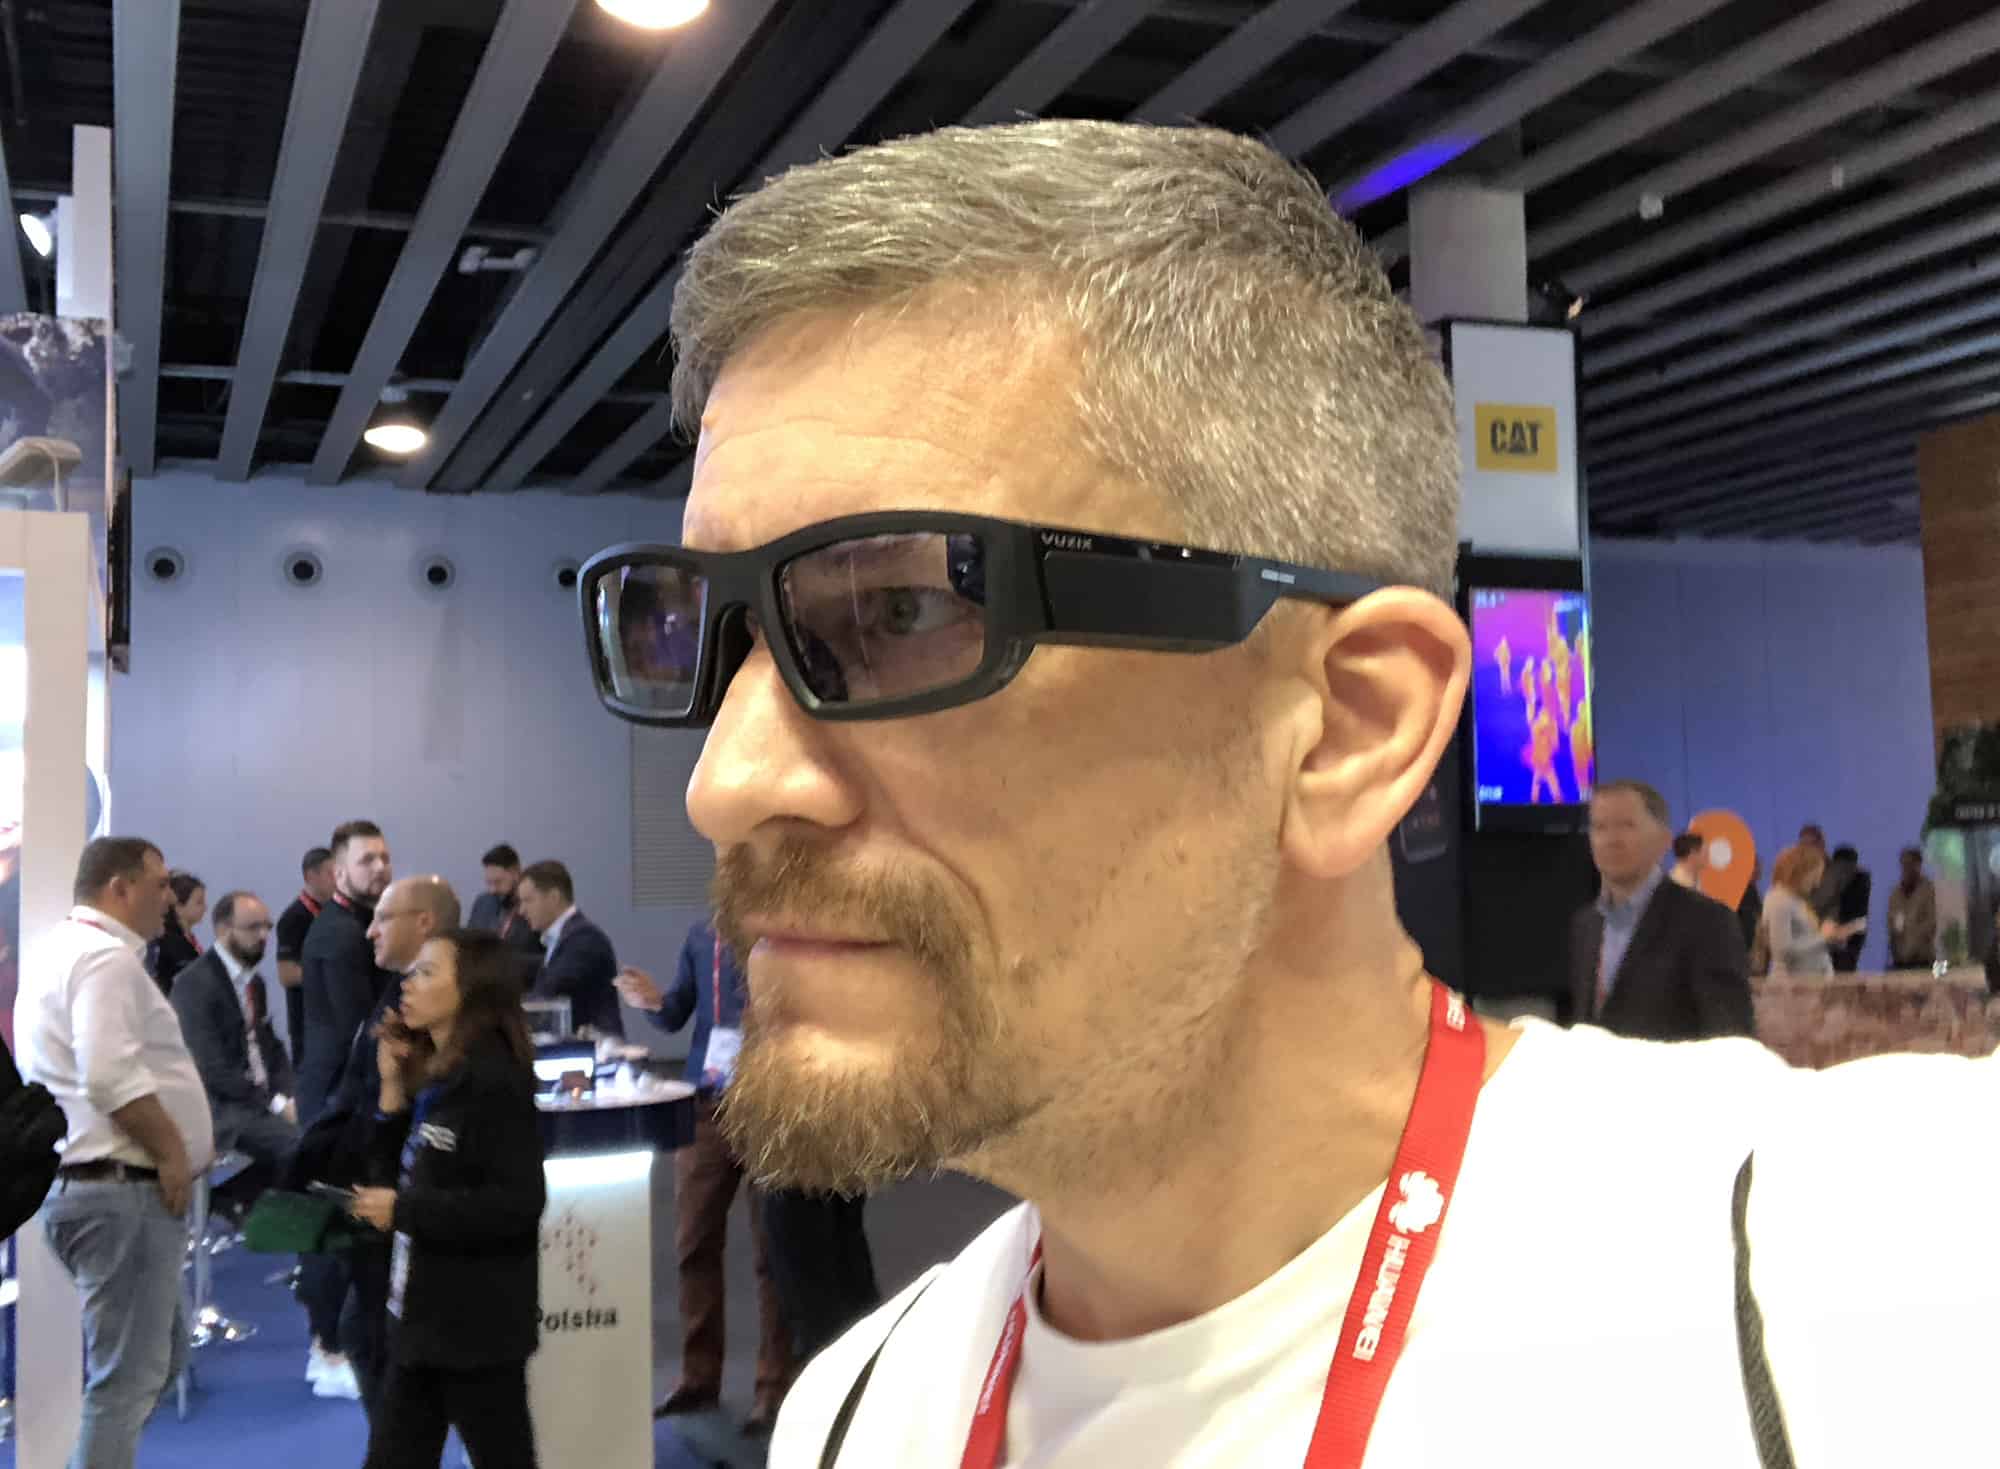 Trying out the Vuzix Blade augmented reality smart glasses at Mobile World Congress 2018.